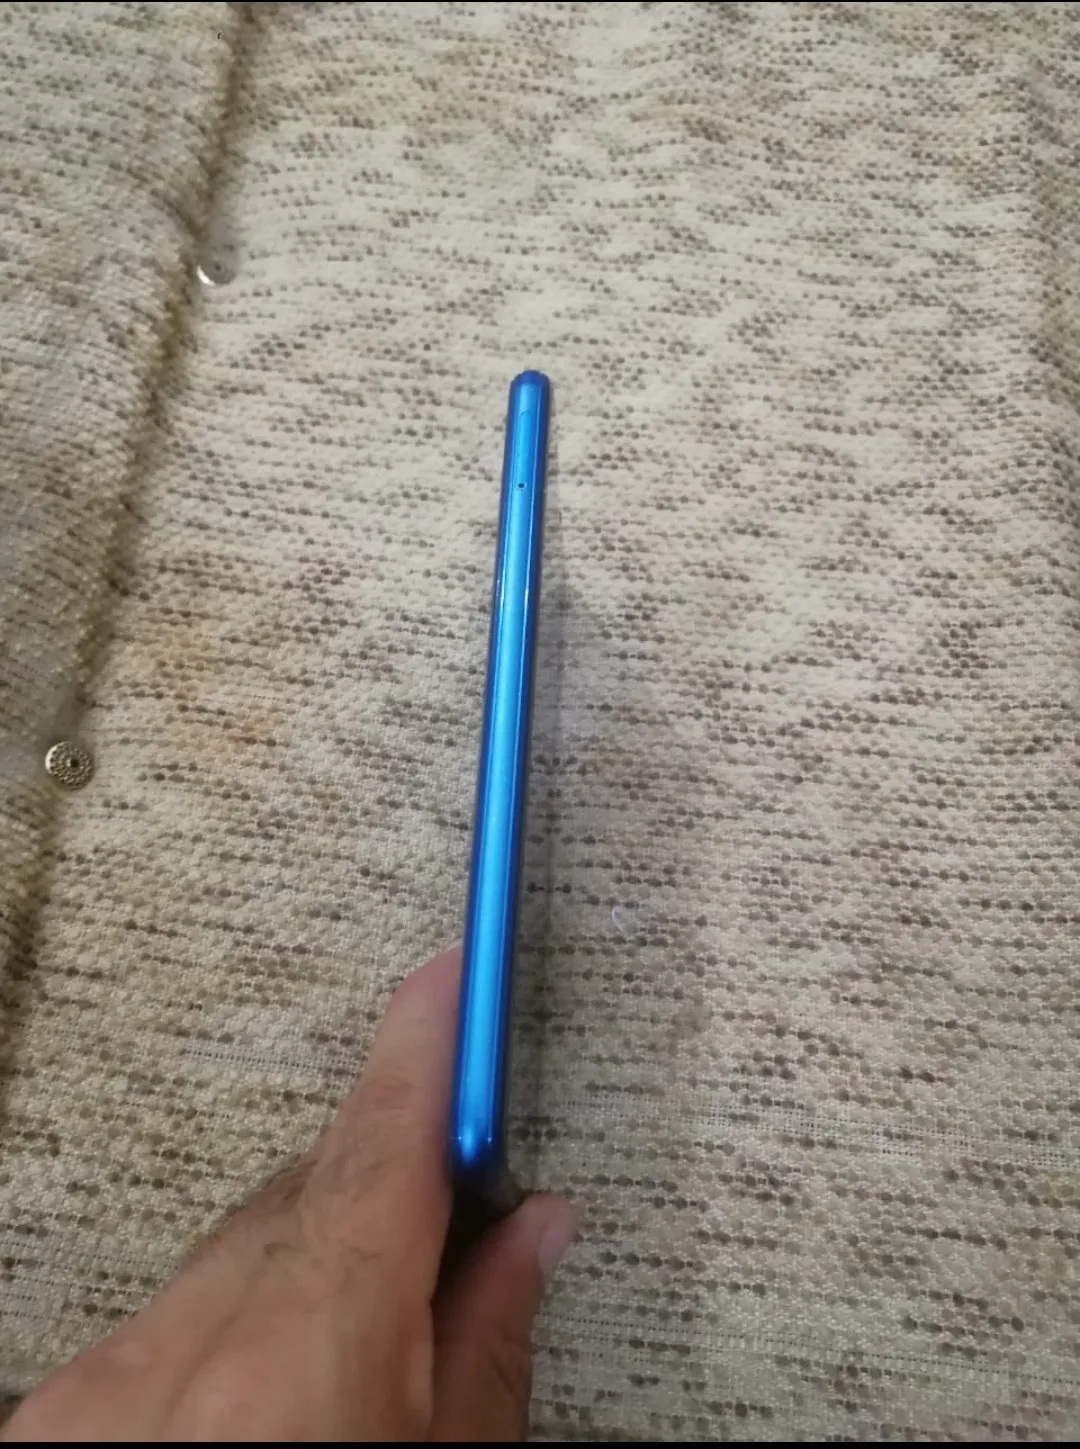 Huawei p20 lite for sale - photo 2